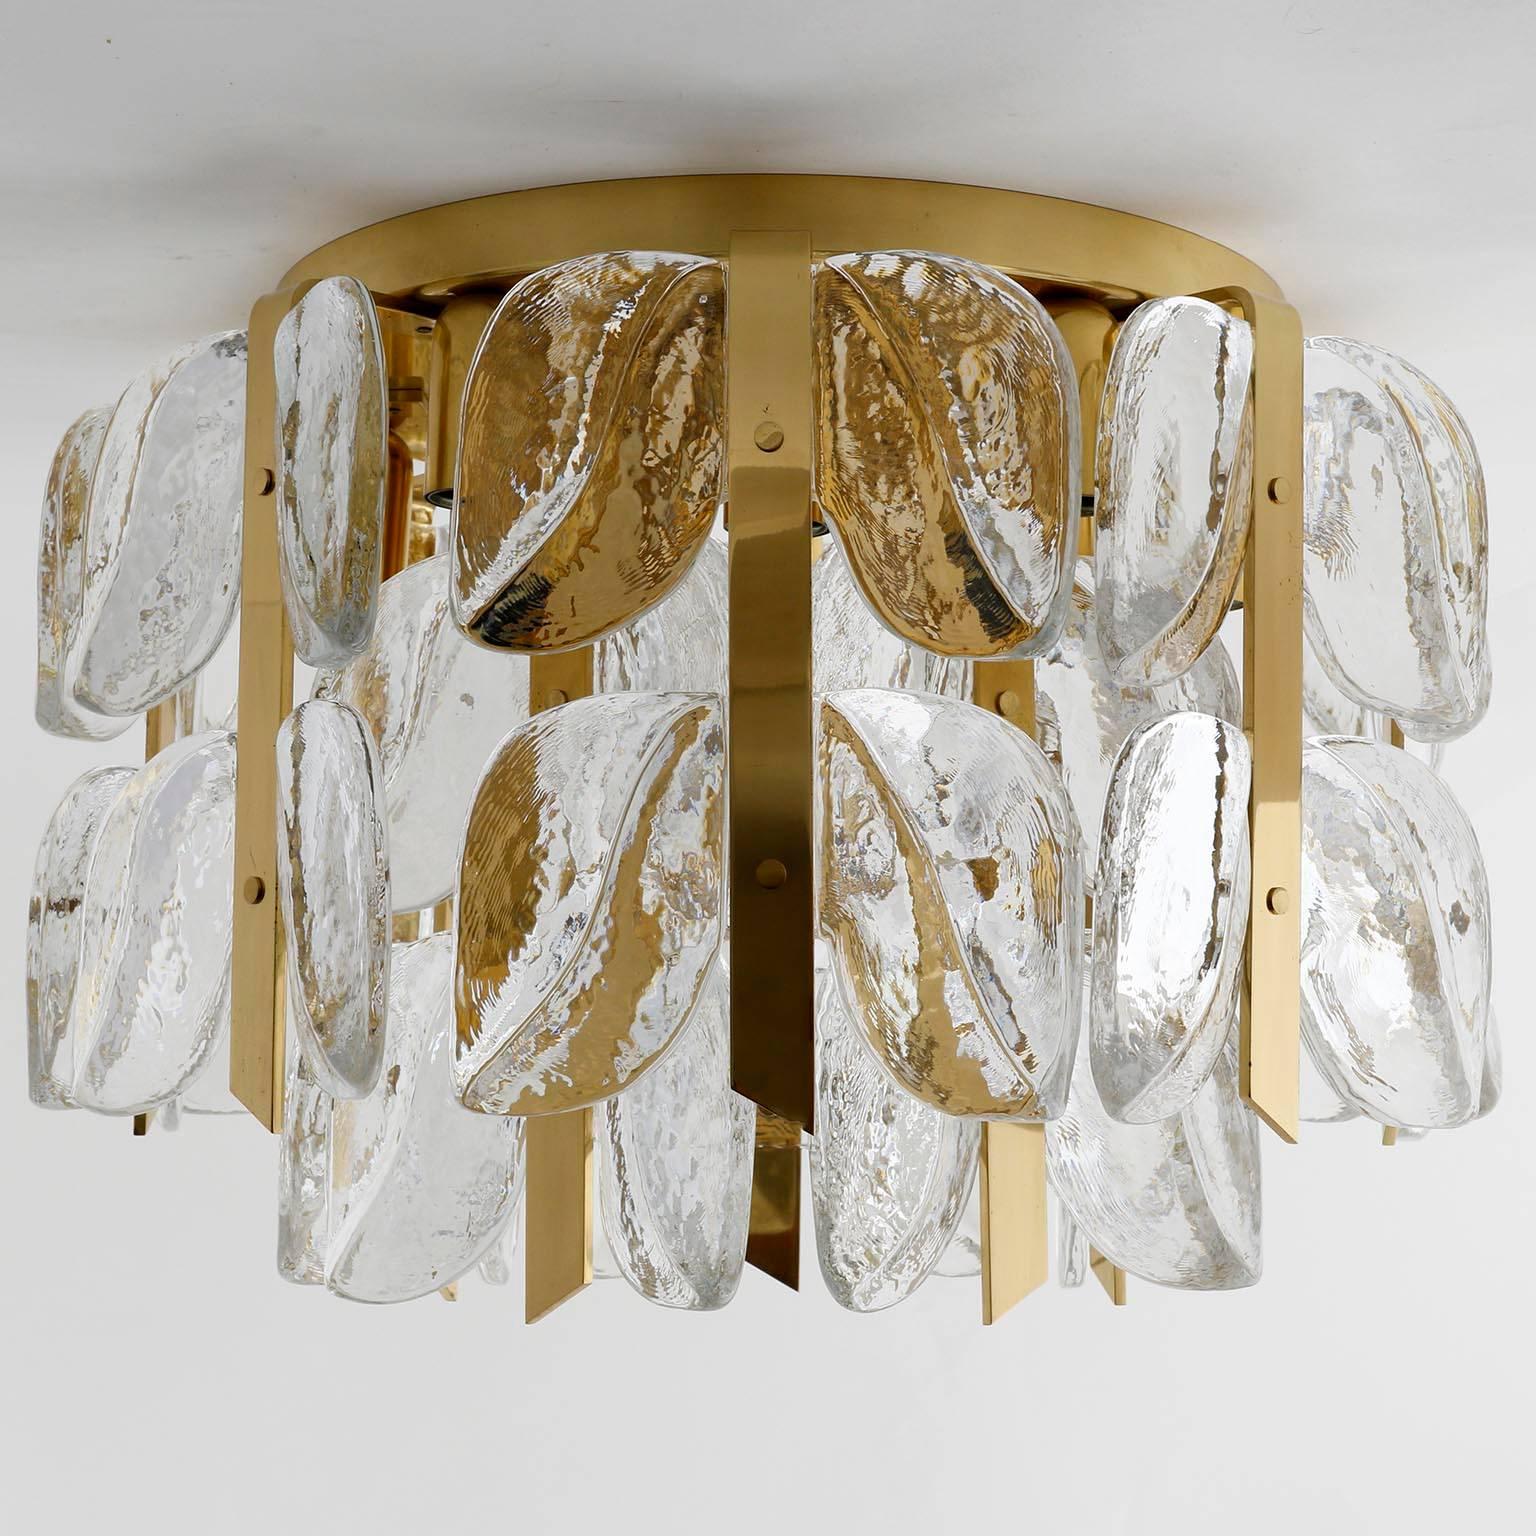 One of six high quality light fixtures model 'Florida' by J.T. Kalmar, Austria, manufactured in midcentury, circa 1970 (late 1960s or early 1970s).
These Hollywood Regency lights are made of polished brass and large fire-polished brilliant crystal